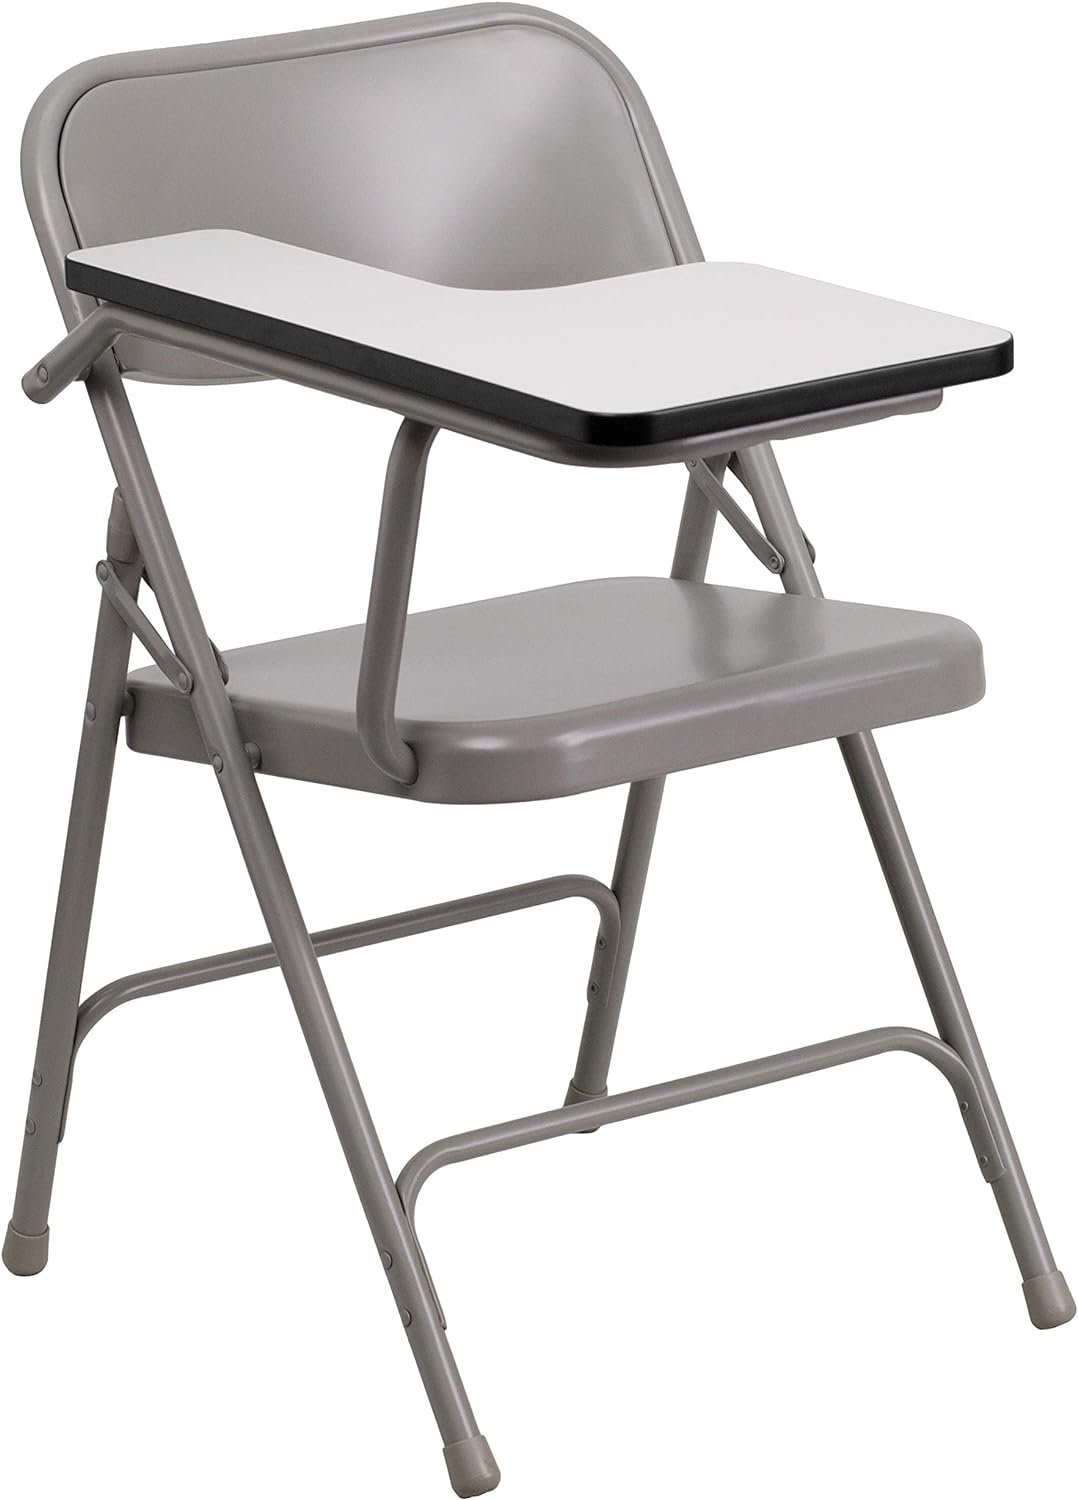 Flash Furniture Ralph Premium Steel Folding Chair with Right Handed Tablet Arm Review